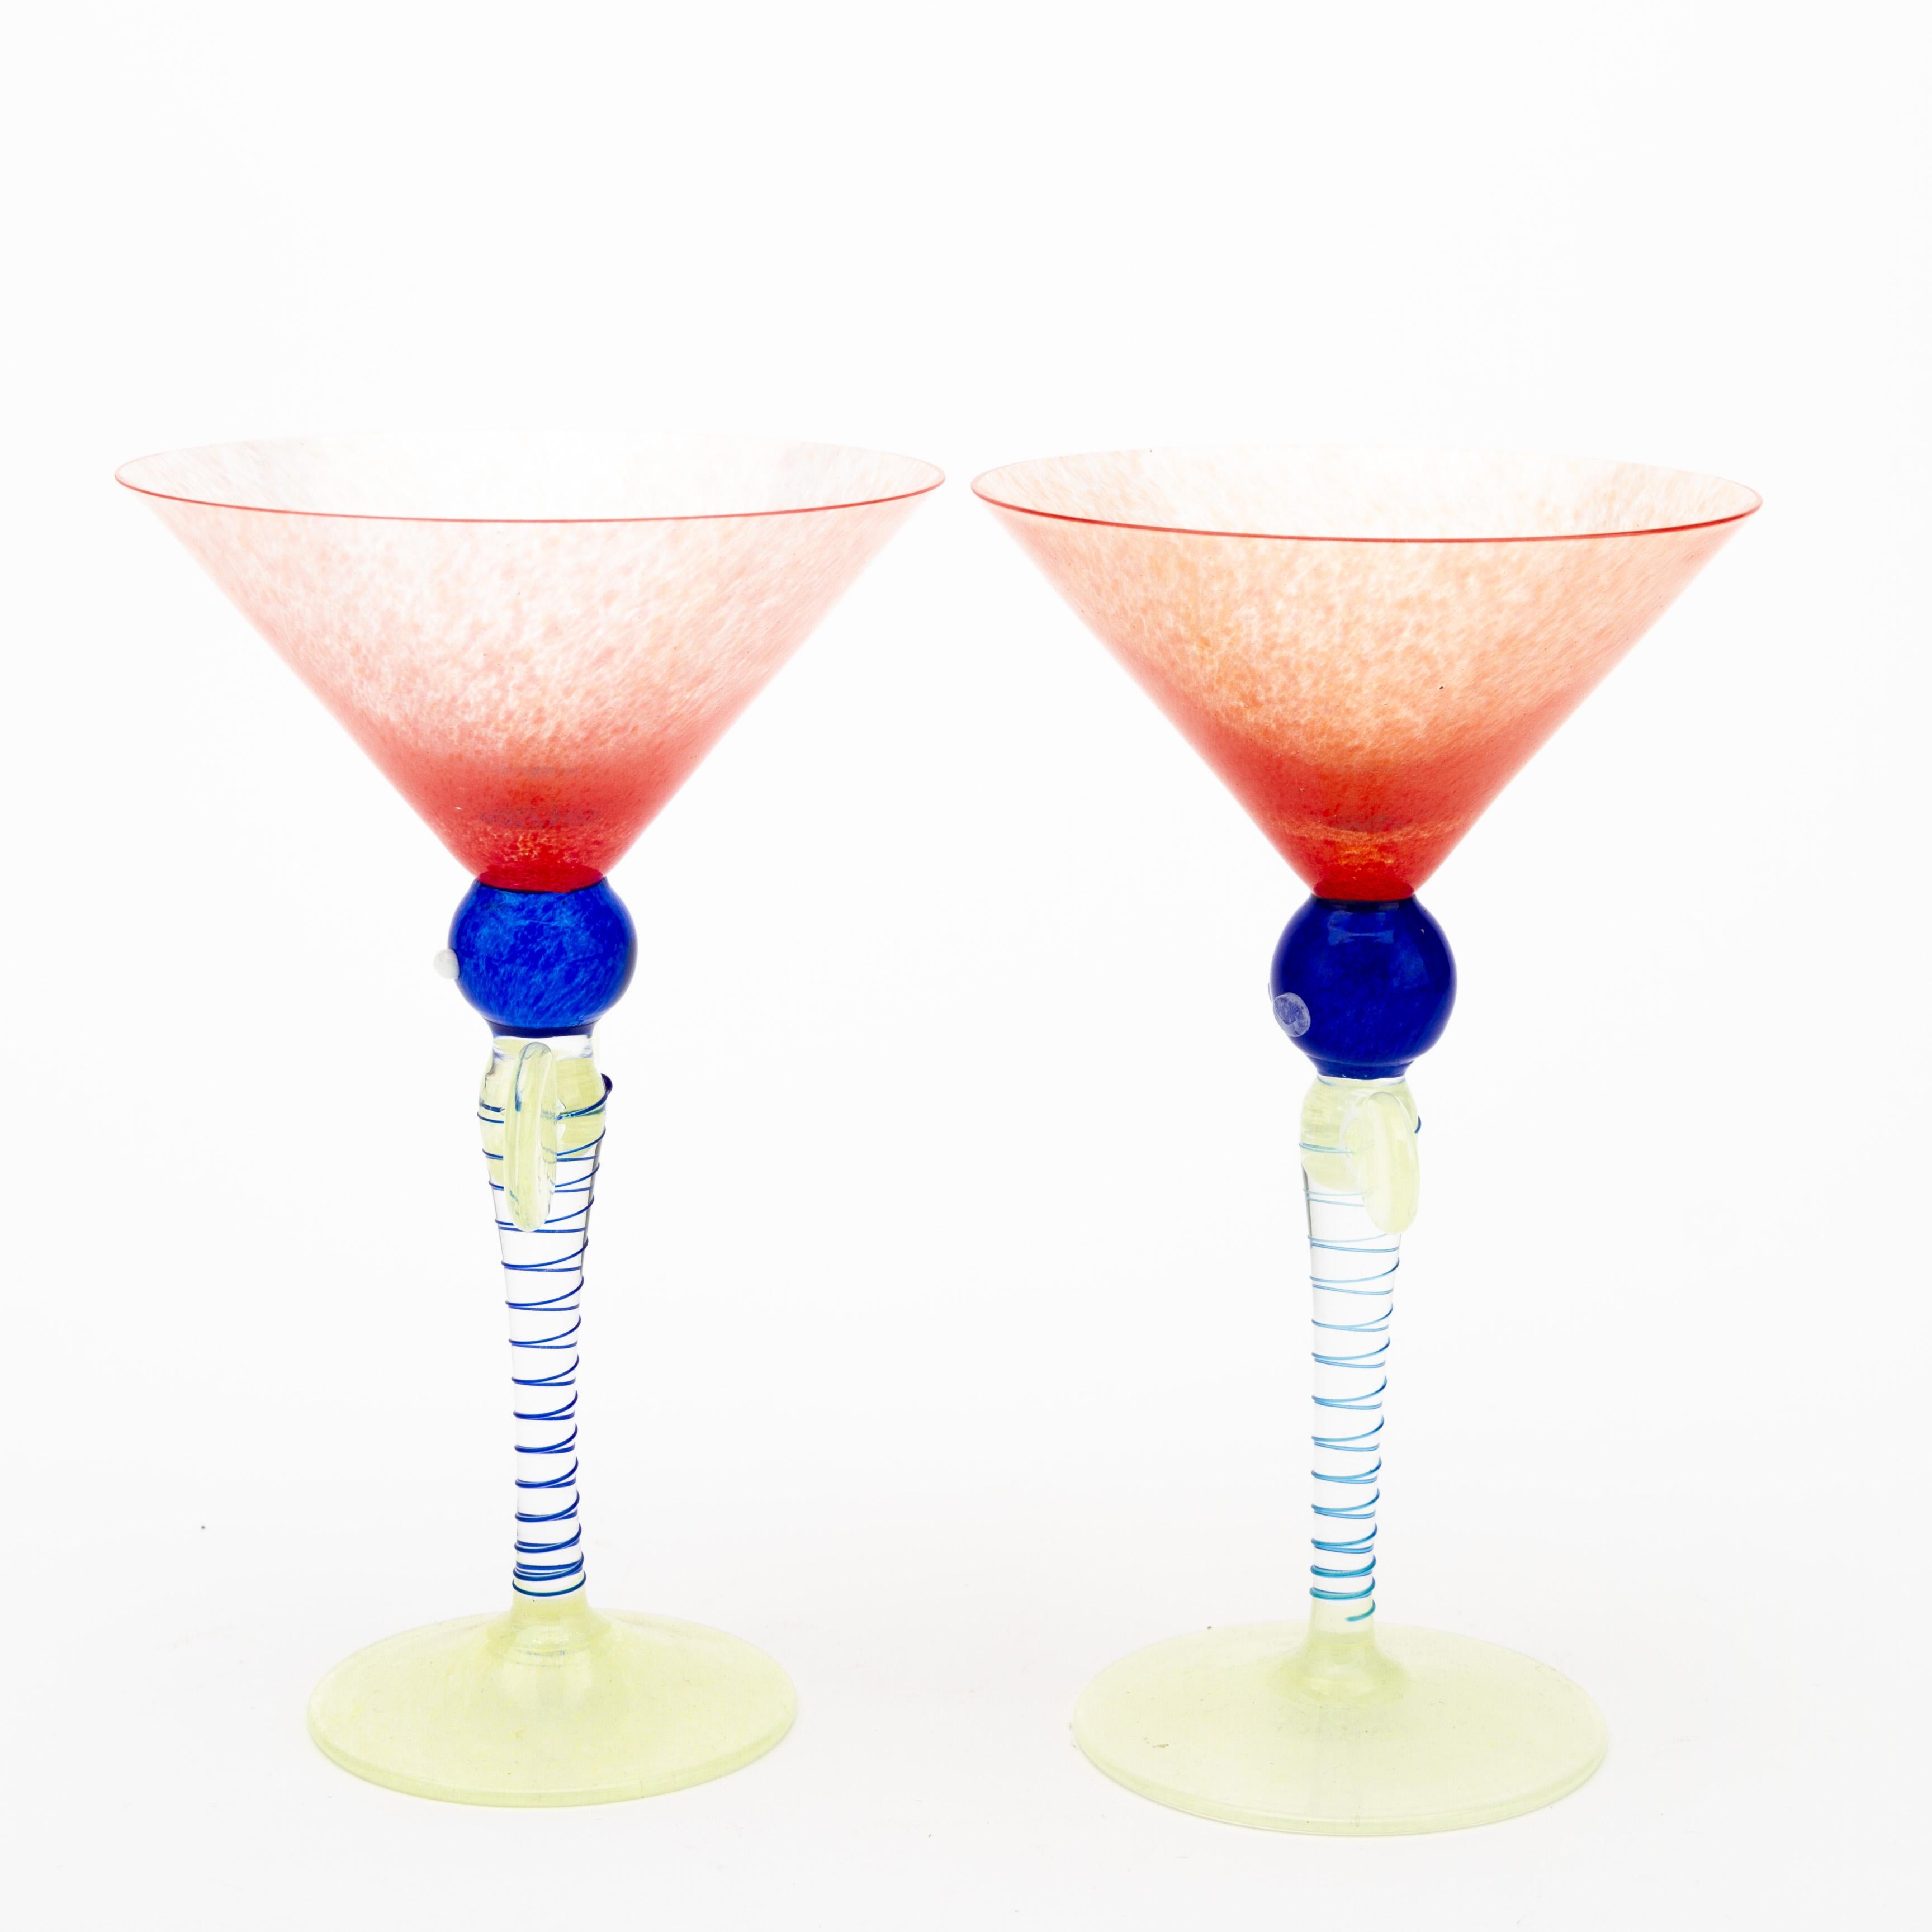 Venetian Pair of Murano Martini Cocktail Glasses
Good condition
Free international shipping.a